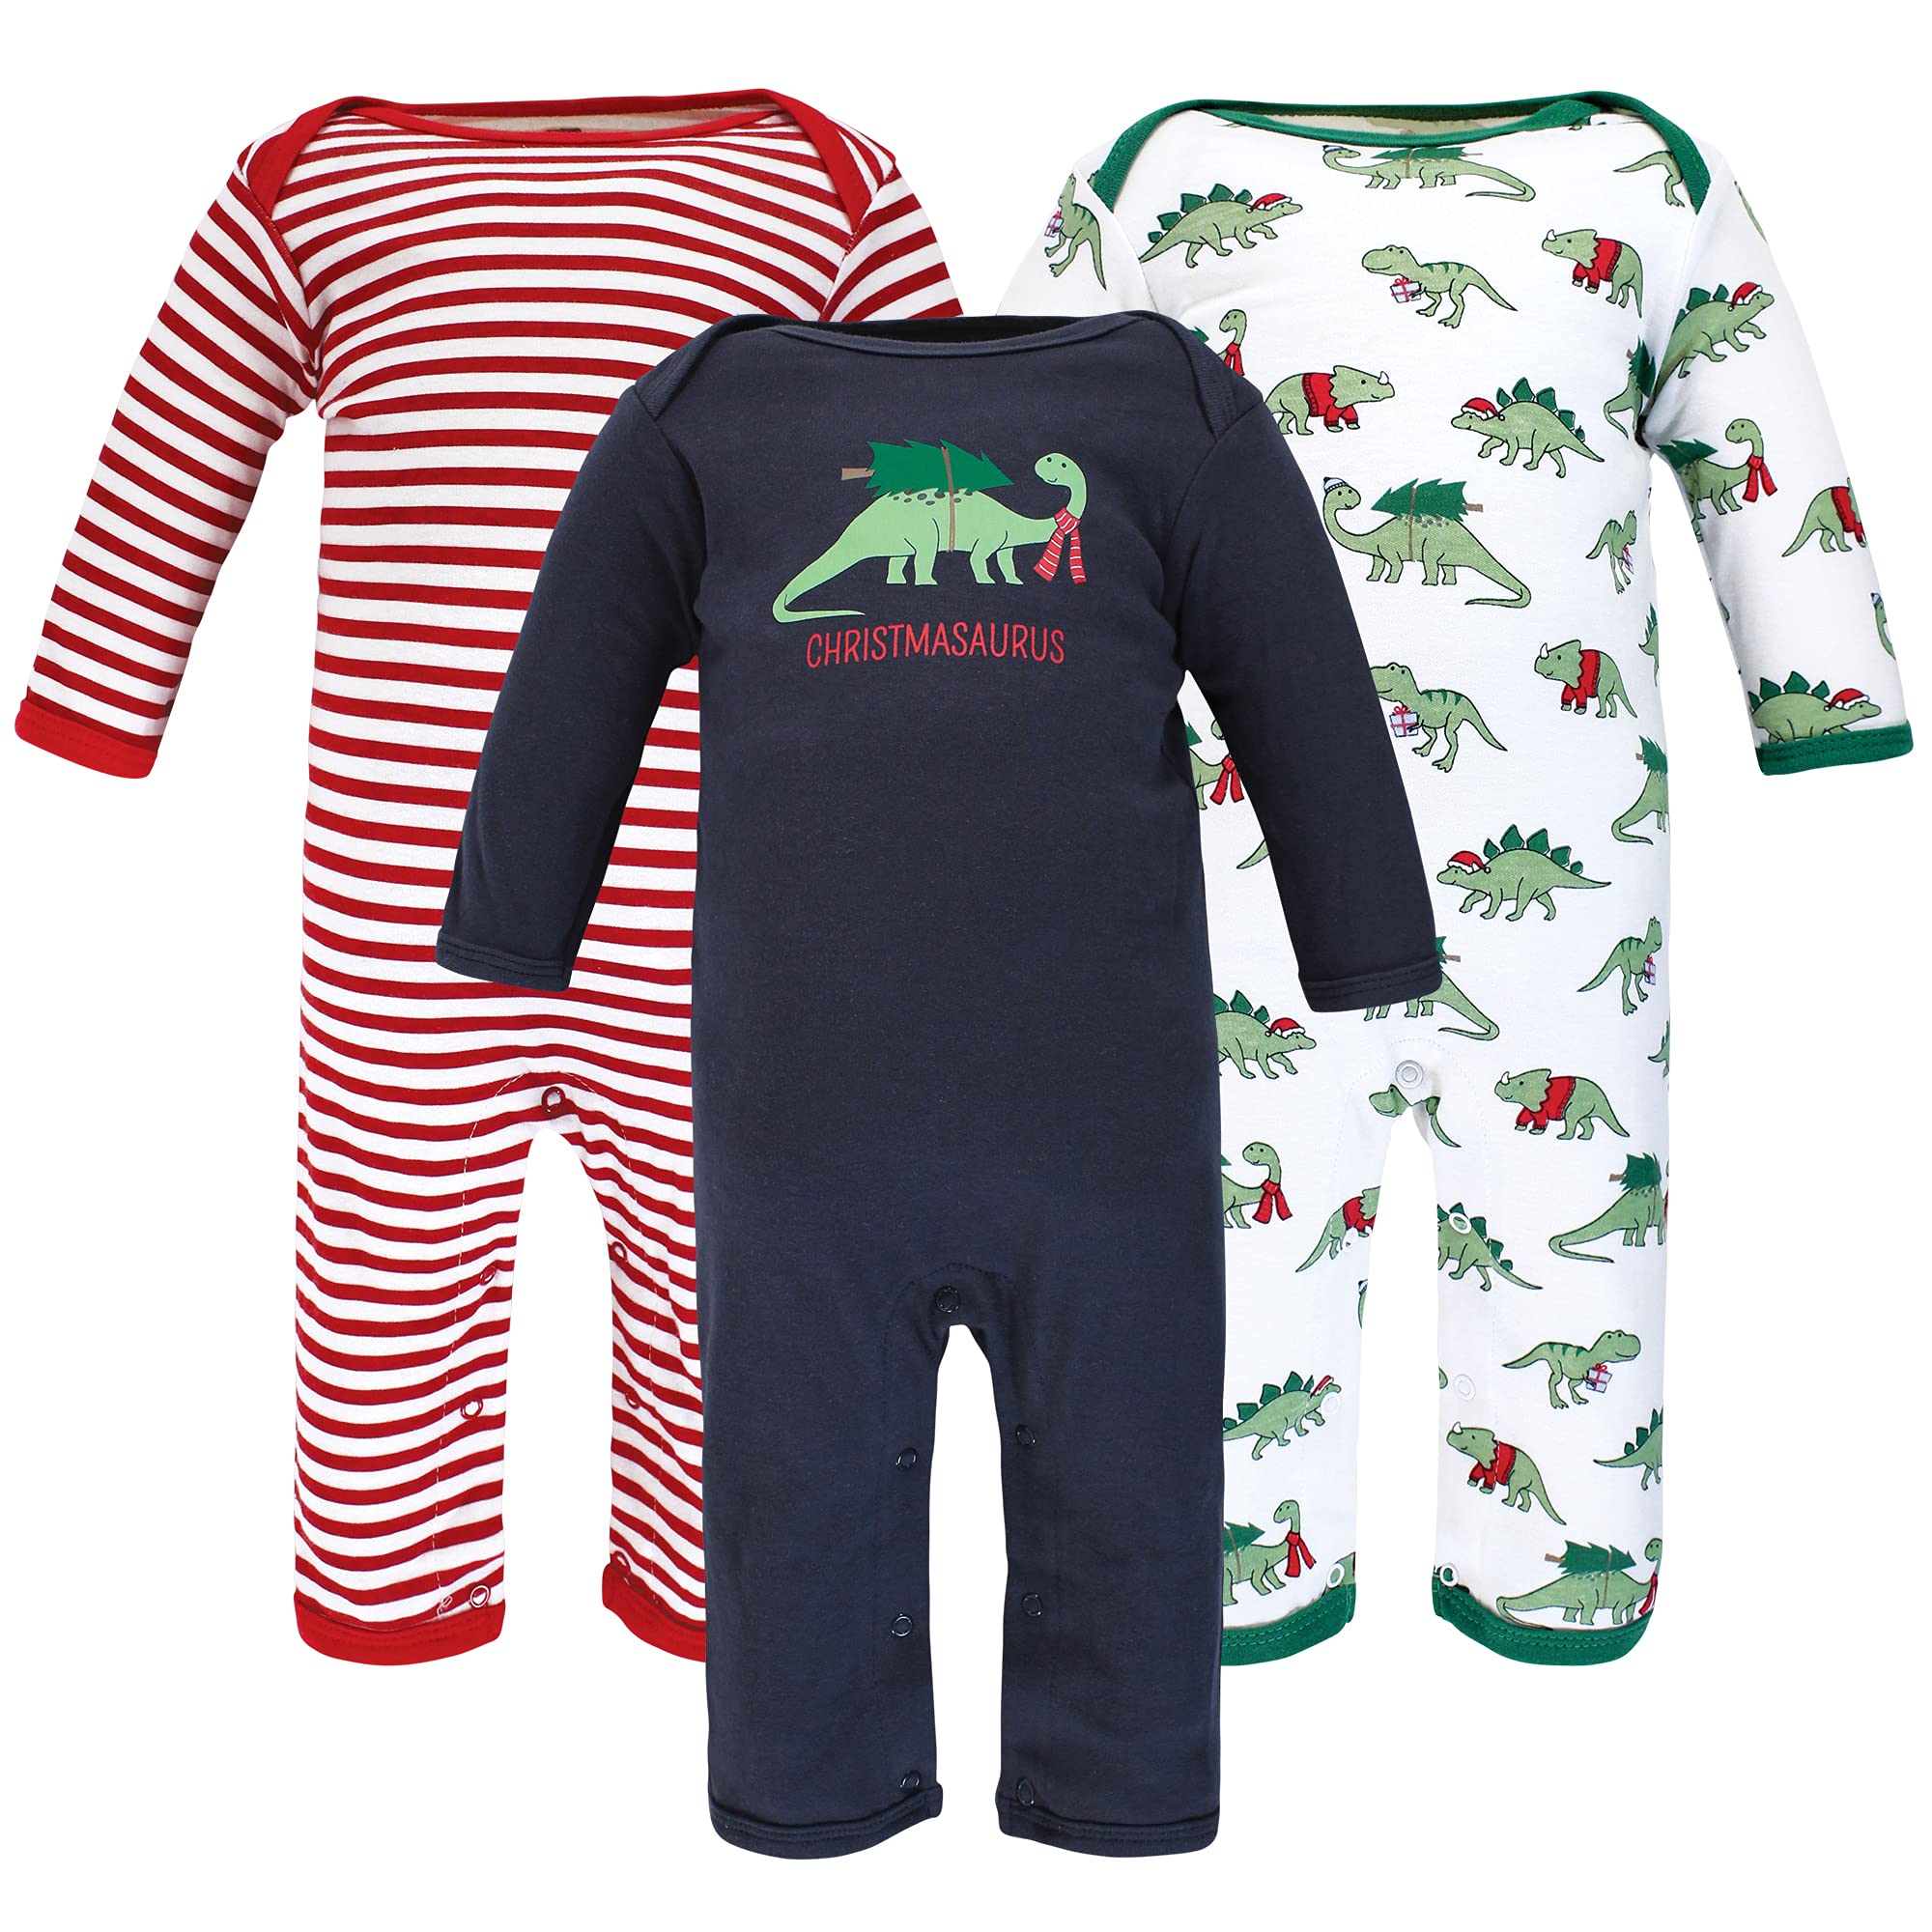 Hudson Baby Unisex Baby Cotton Coveralls Christmasaurus, 3-6 Months